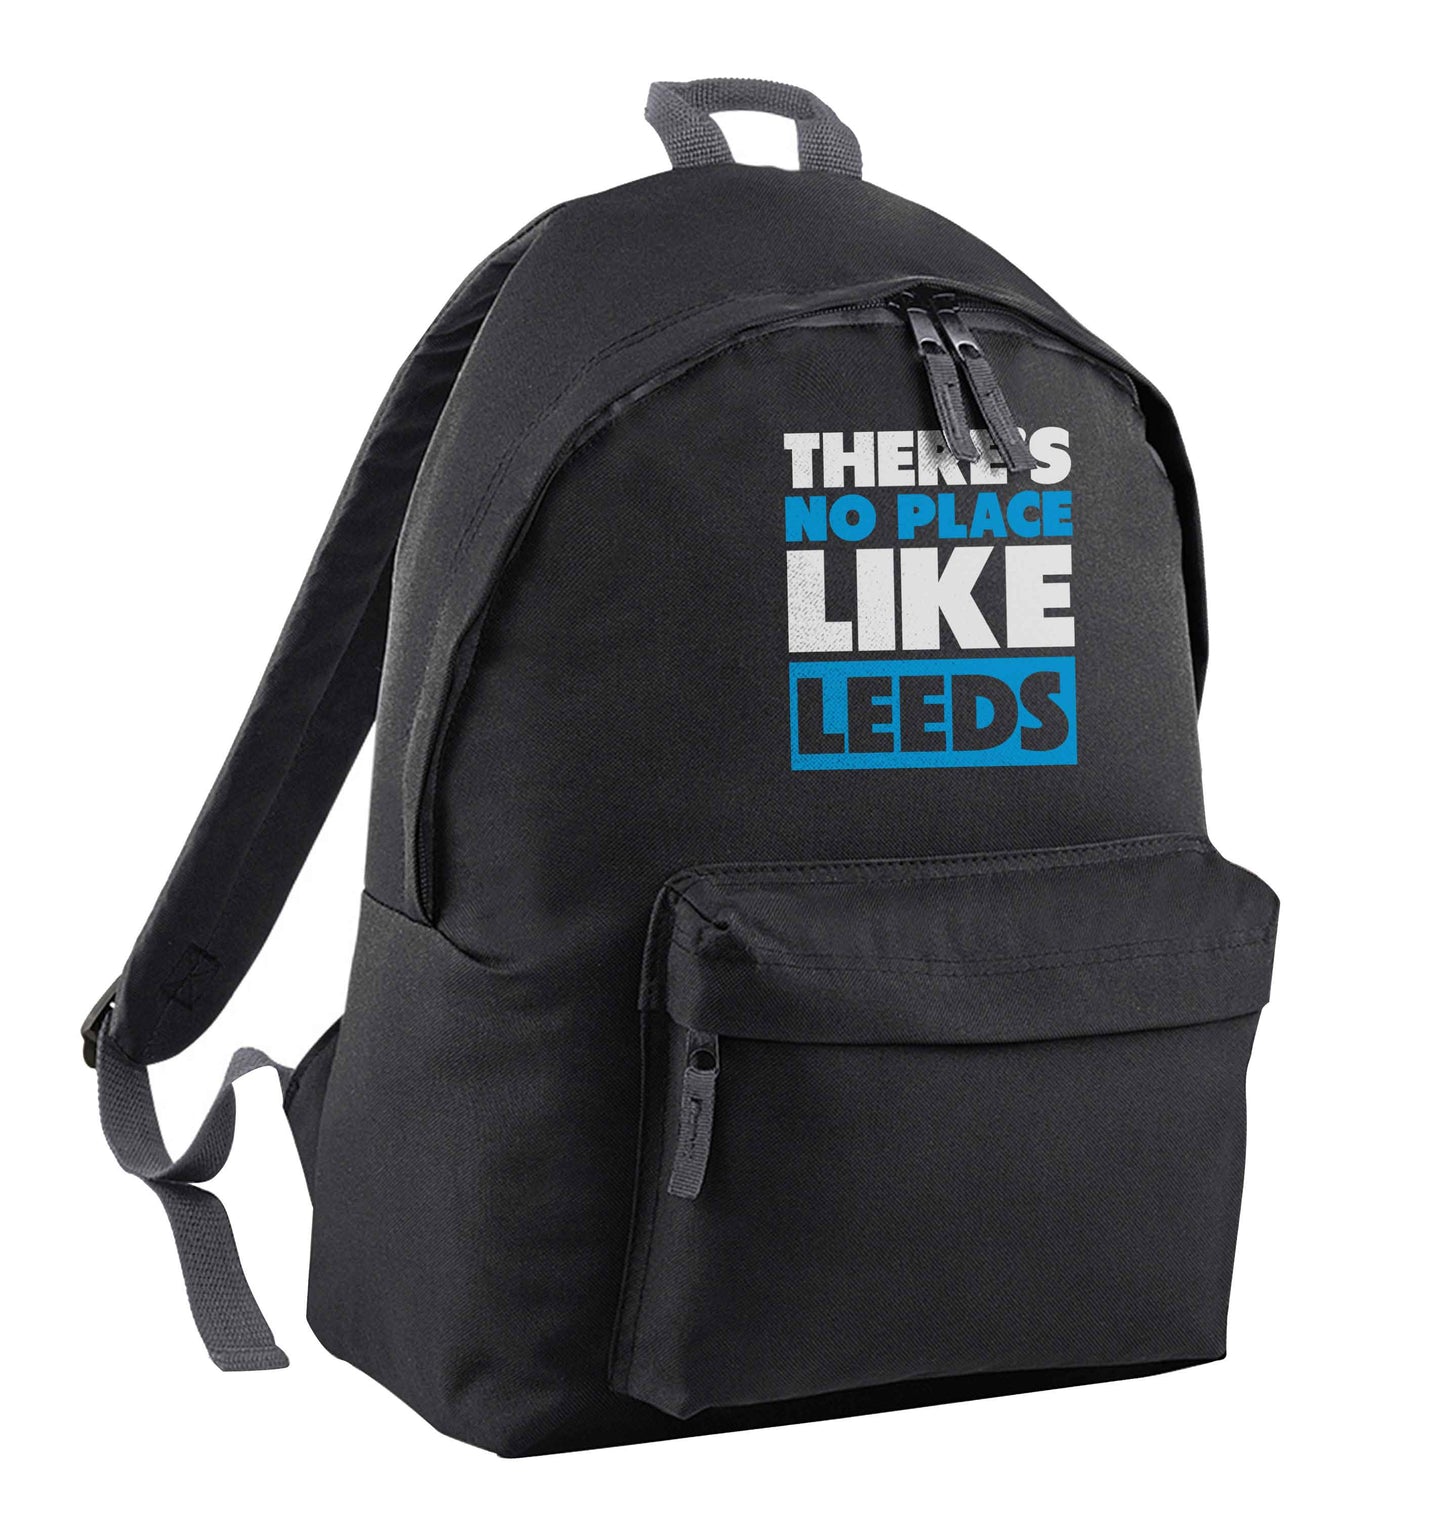 There's no place like Leeds black children's backpack